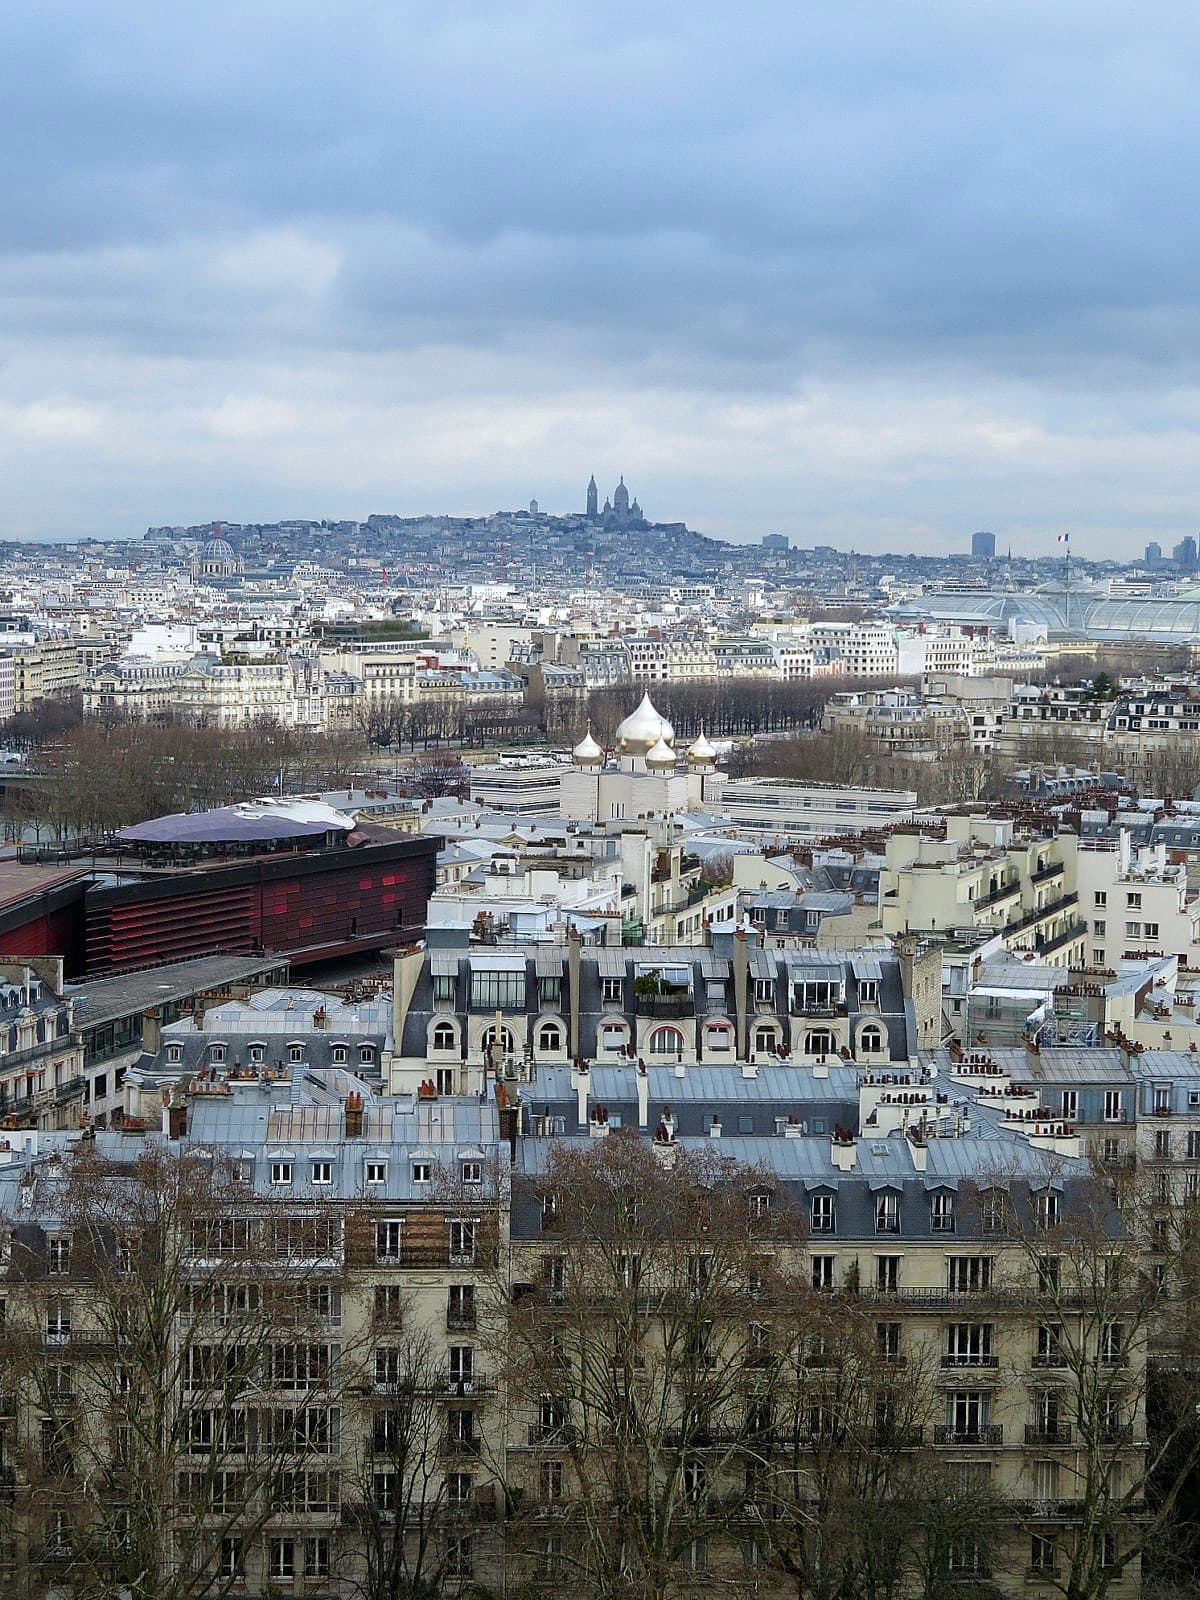 View of Paris, including Montmartre, from the second level of the Eiffel Tower in Paris with kids